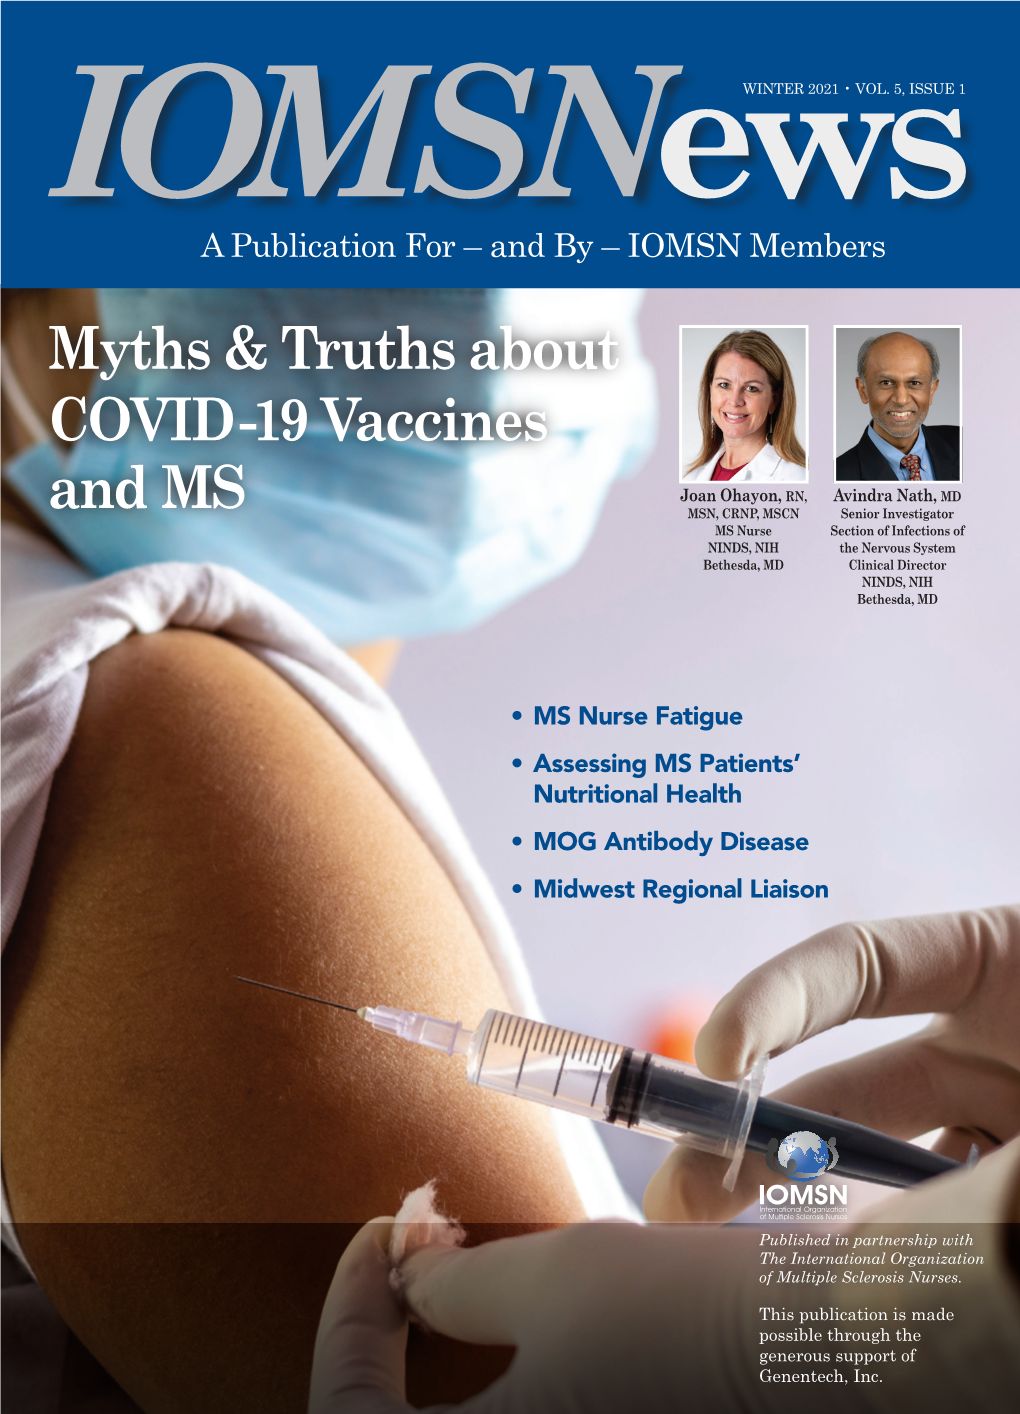 Myths & Truths About COVID-19 Vaccines and MS